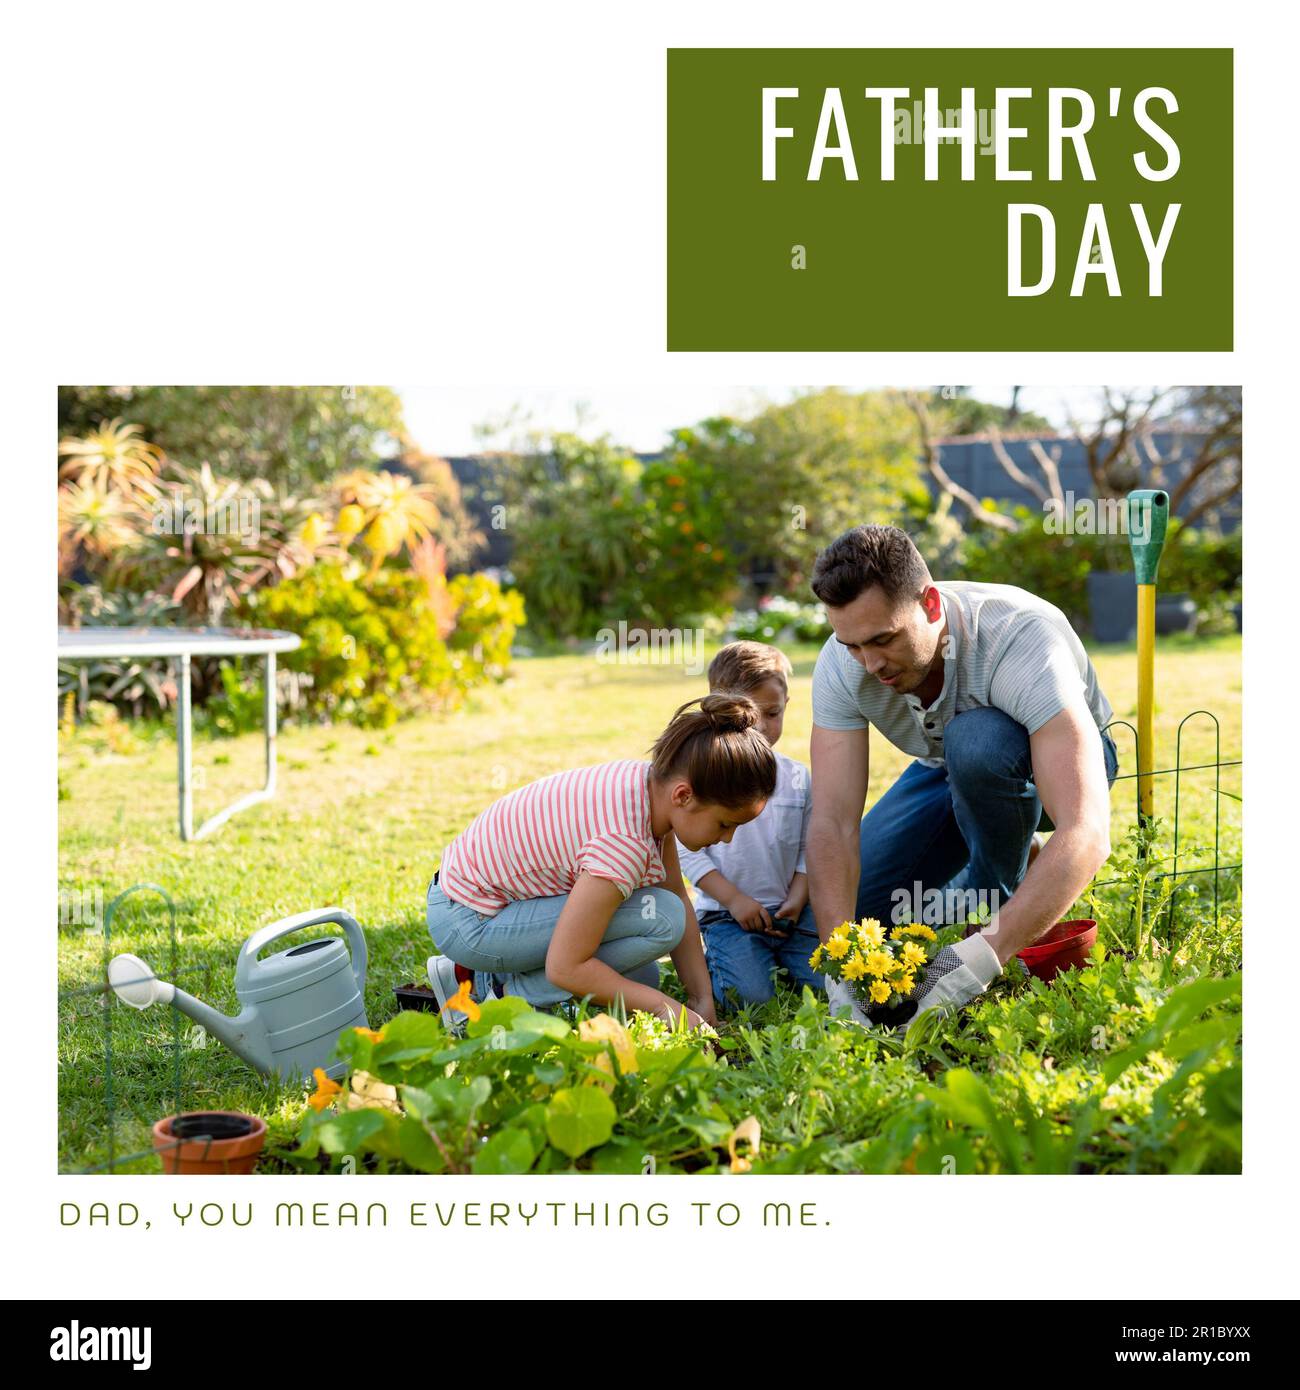 Composition of father's day text over caucasian father with son and daughter gardening Stock Photo